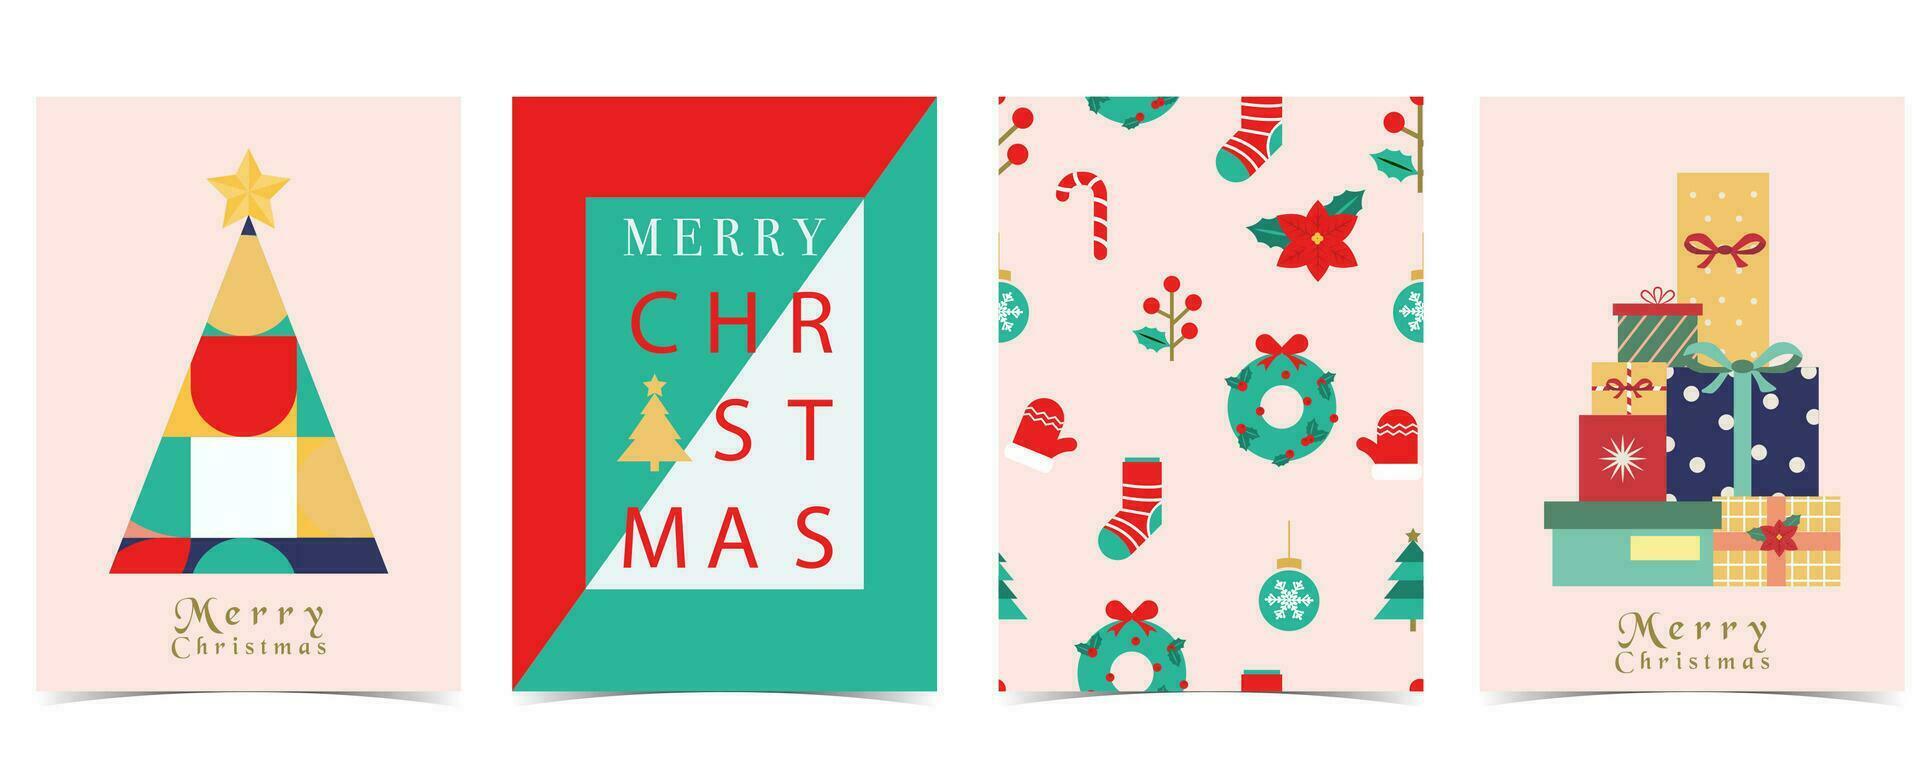 Christmas background with tree,gift,wreath.Editable vector illustration for postcard,a4 size